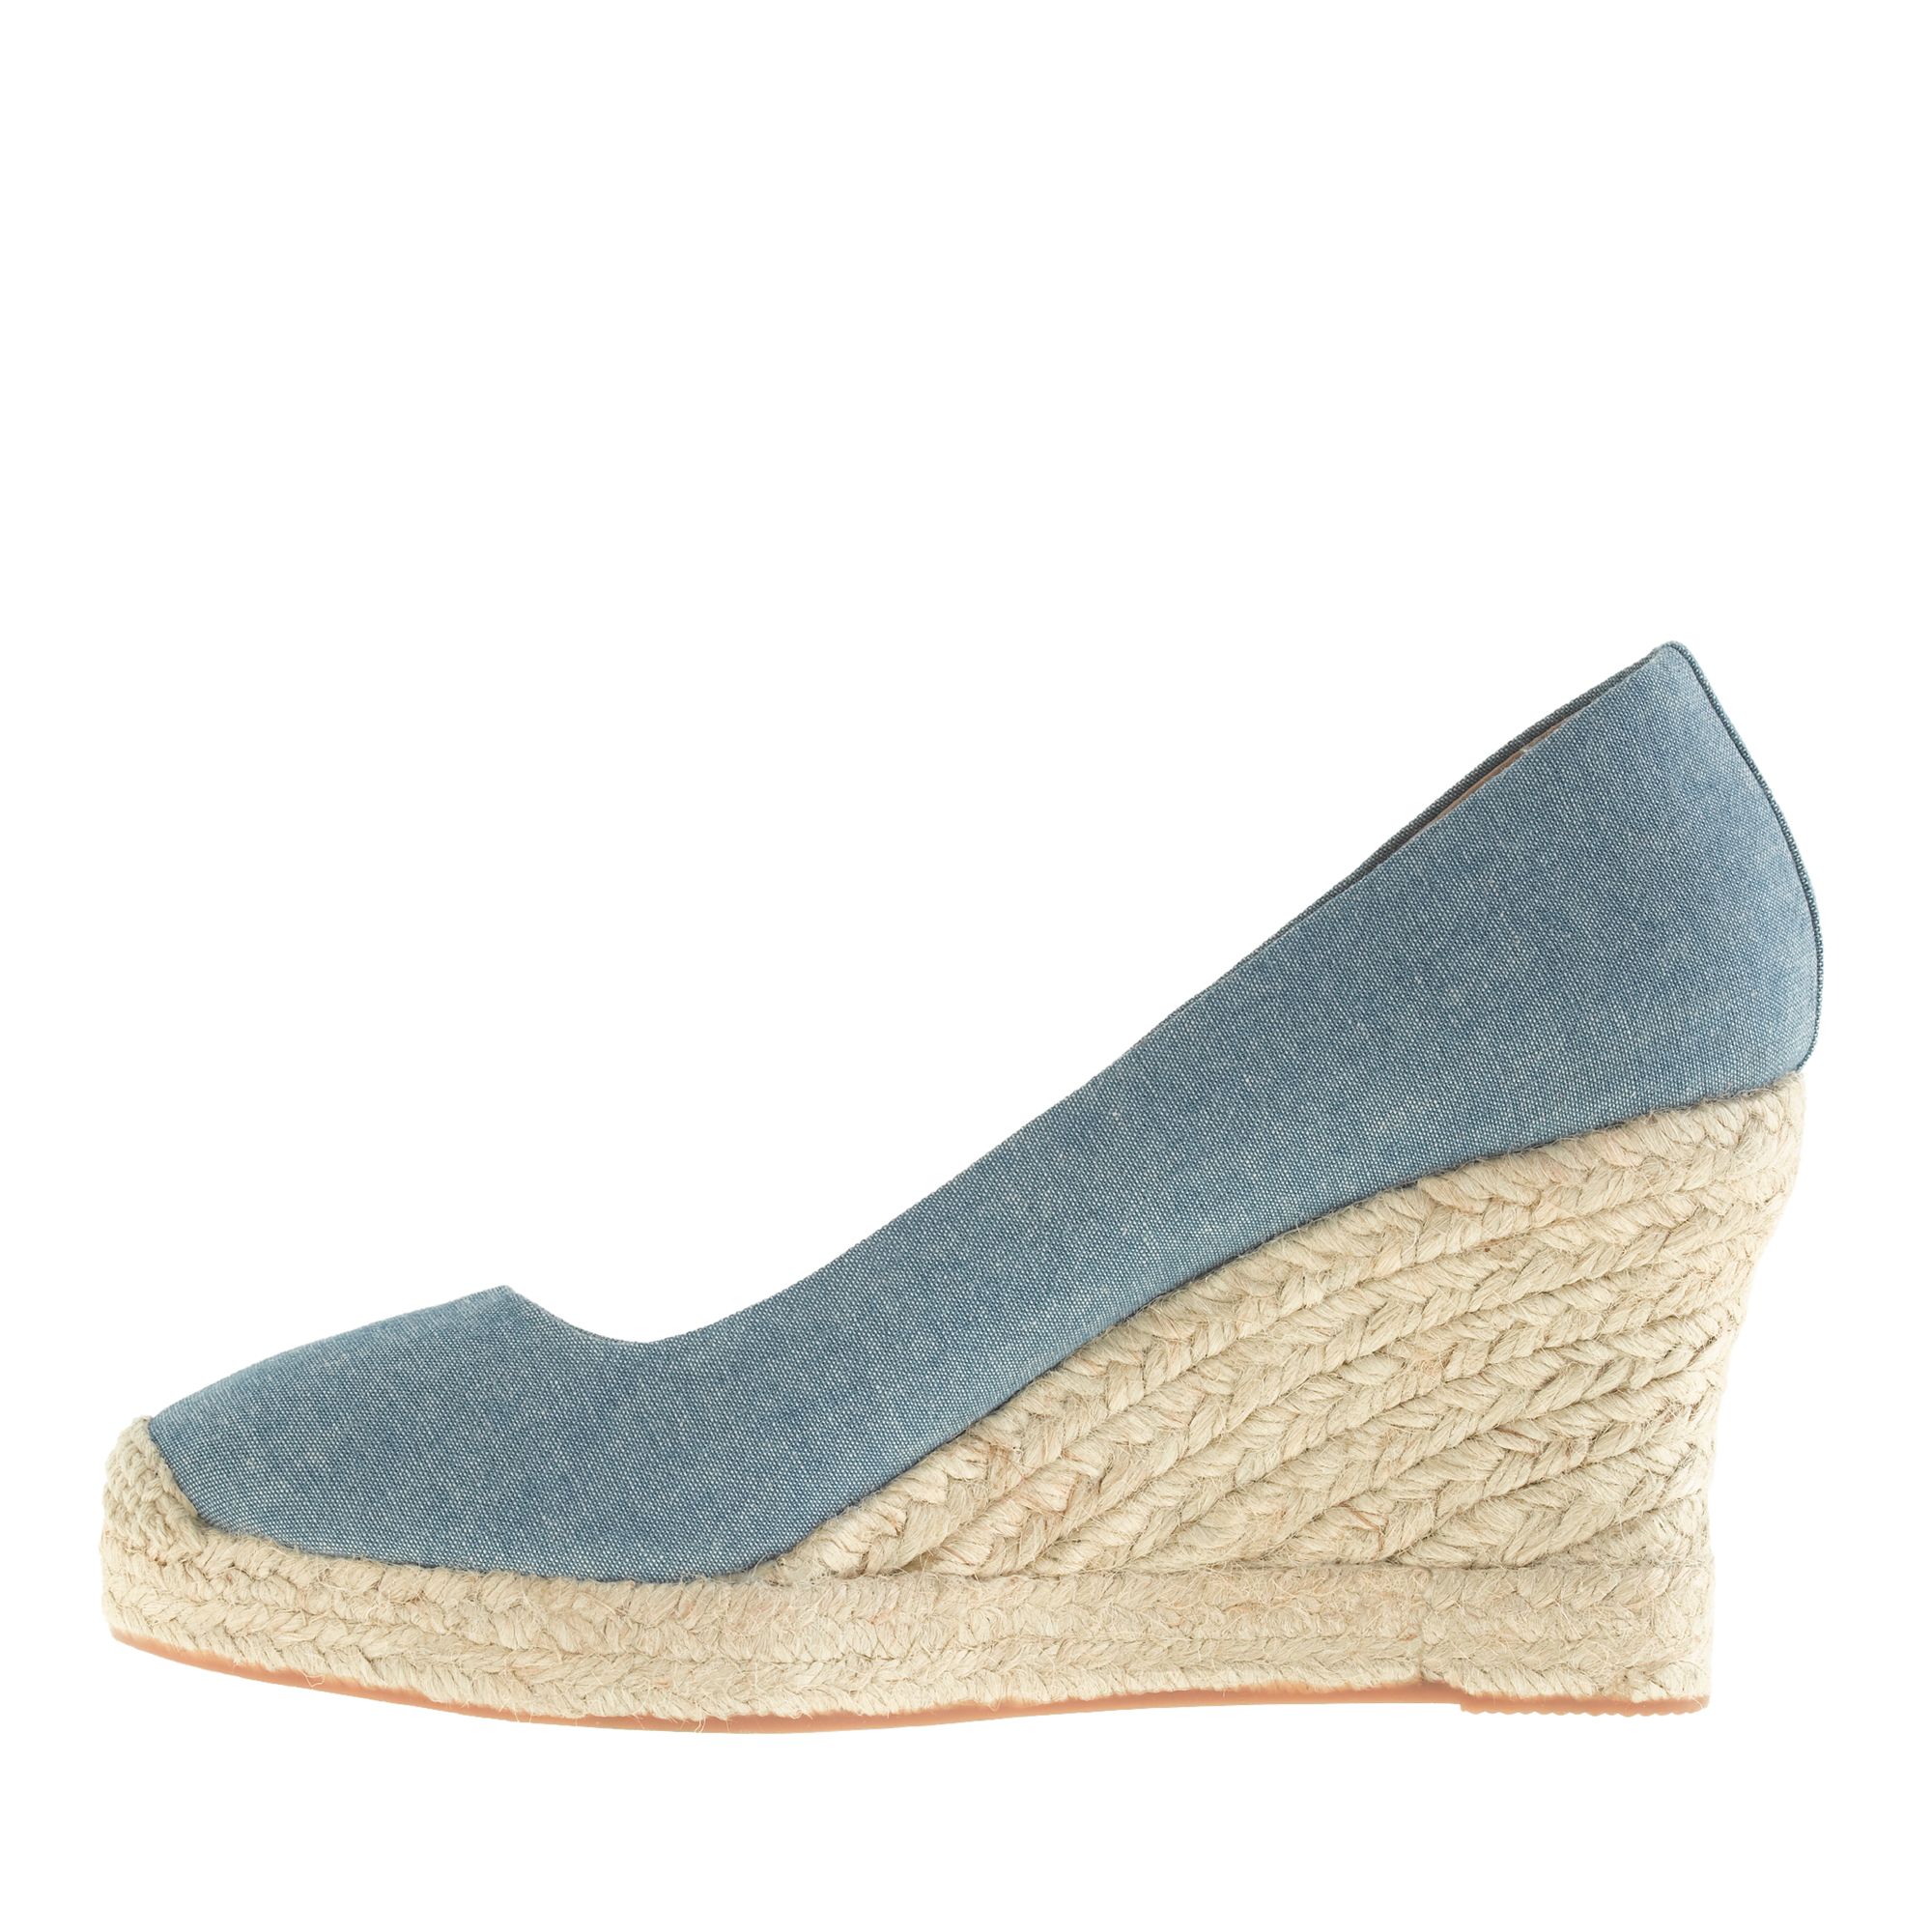 J.crew Seville Chambray Espadrilles in Blue | Lyst